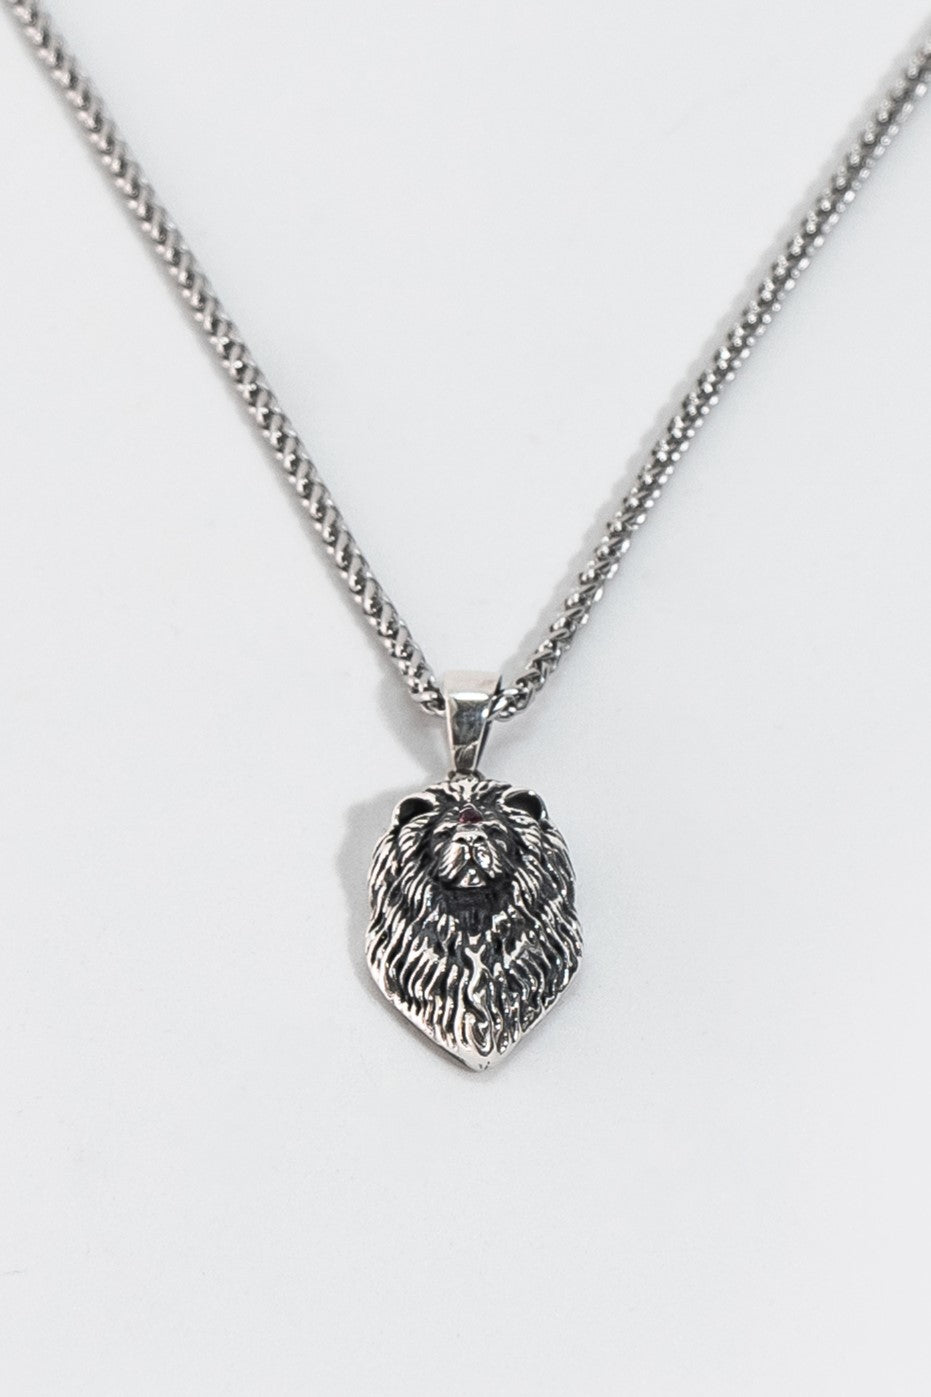 Lion necklace with Stone